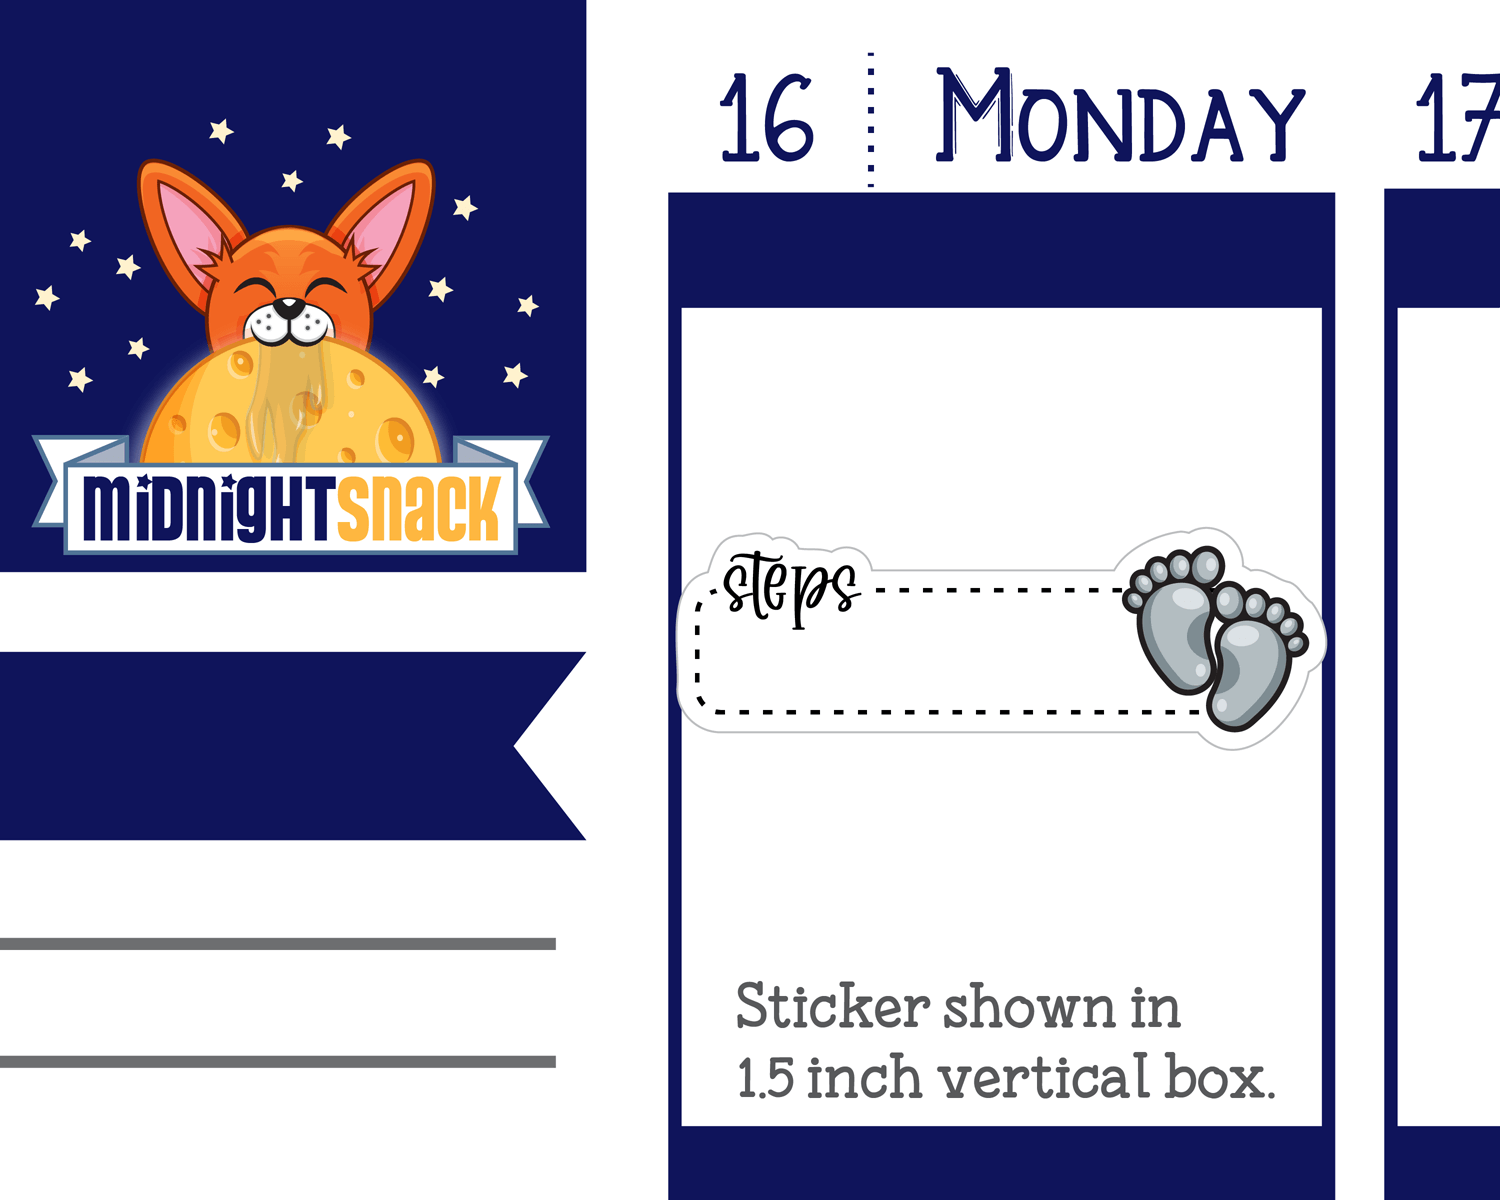 Step Tracker: Fitness and Exercise Planner Stickers